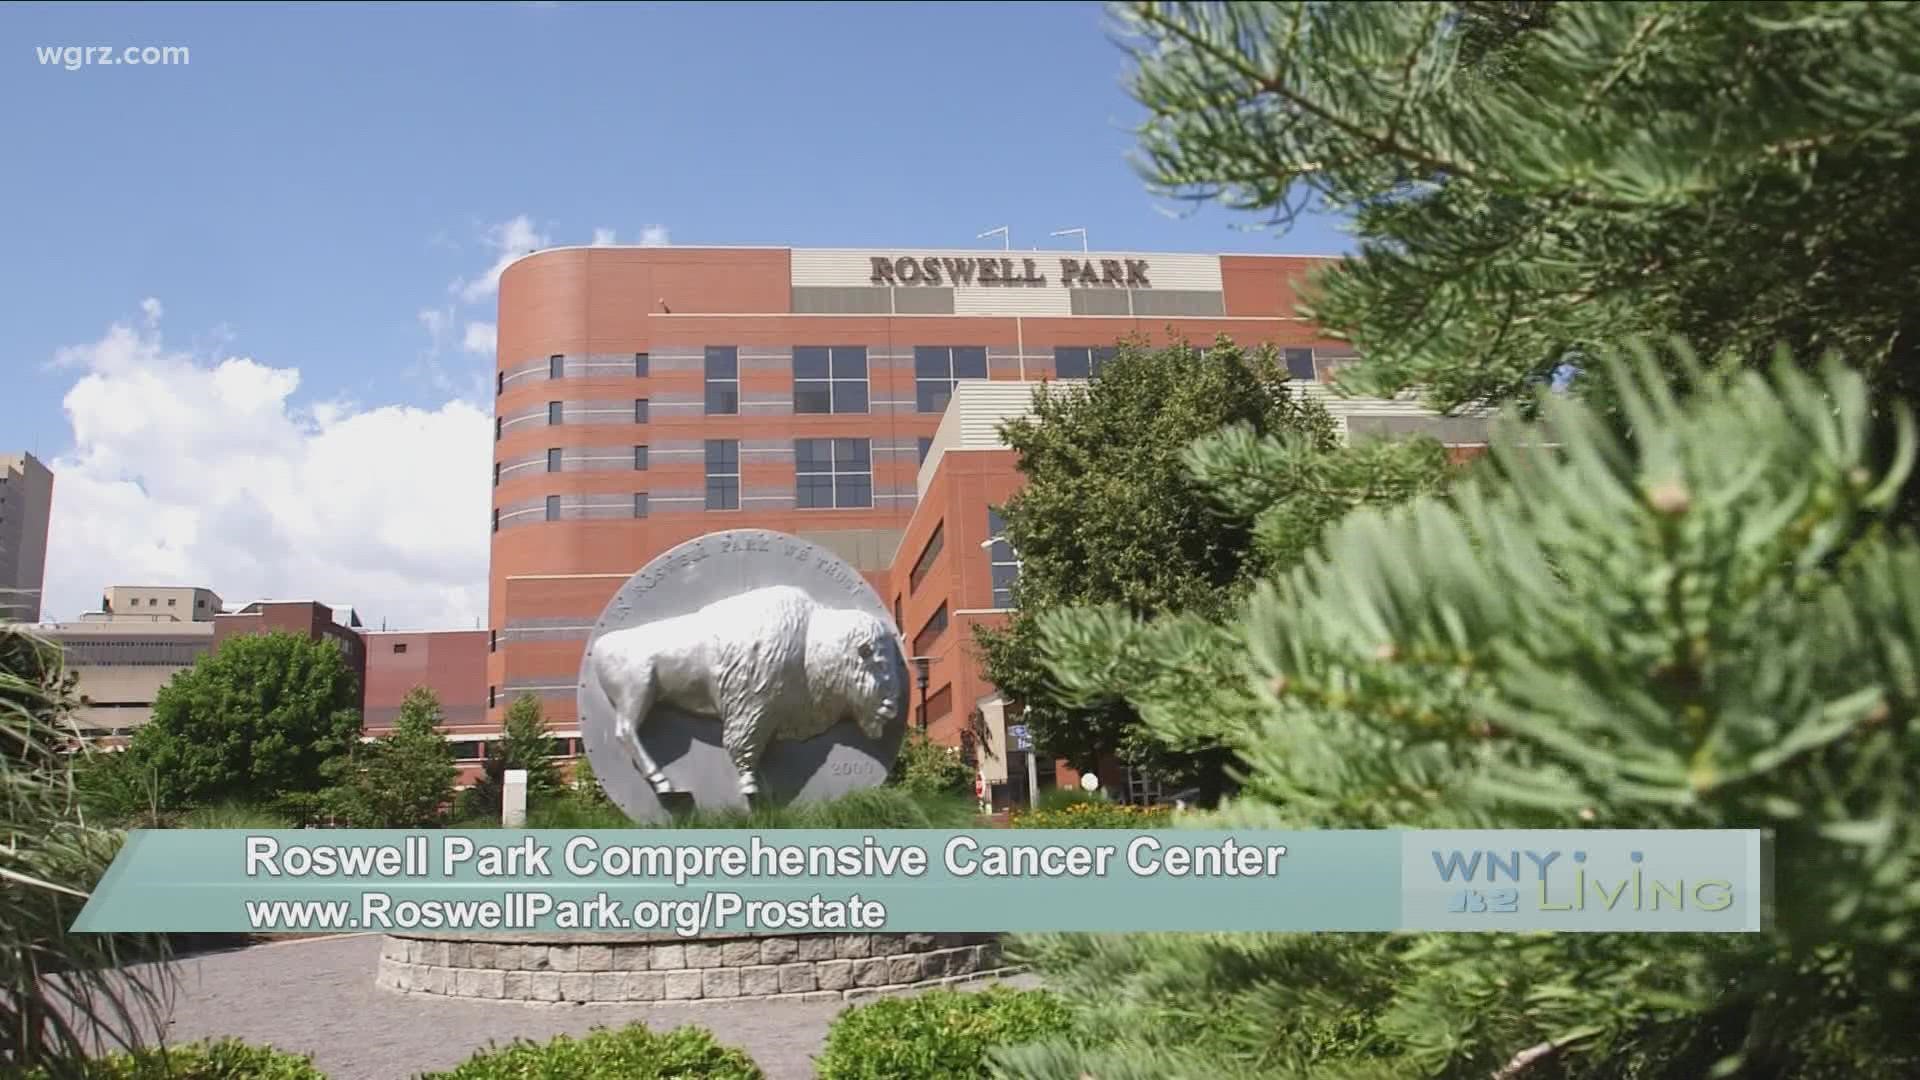 WNY Living - September 11 - Roswell Park Comprehensive Cancer Center (THIS VIDEO IS SPONSORED BY ROSWELL PARK COMPREHENSIVE CANCER CENTER)